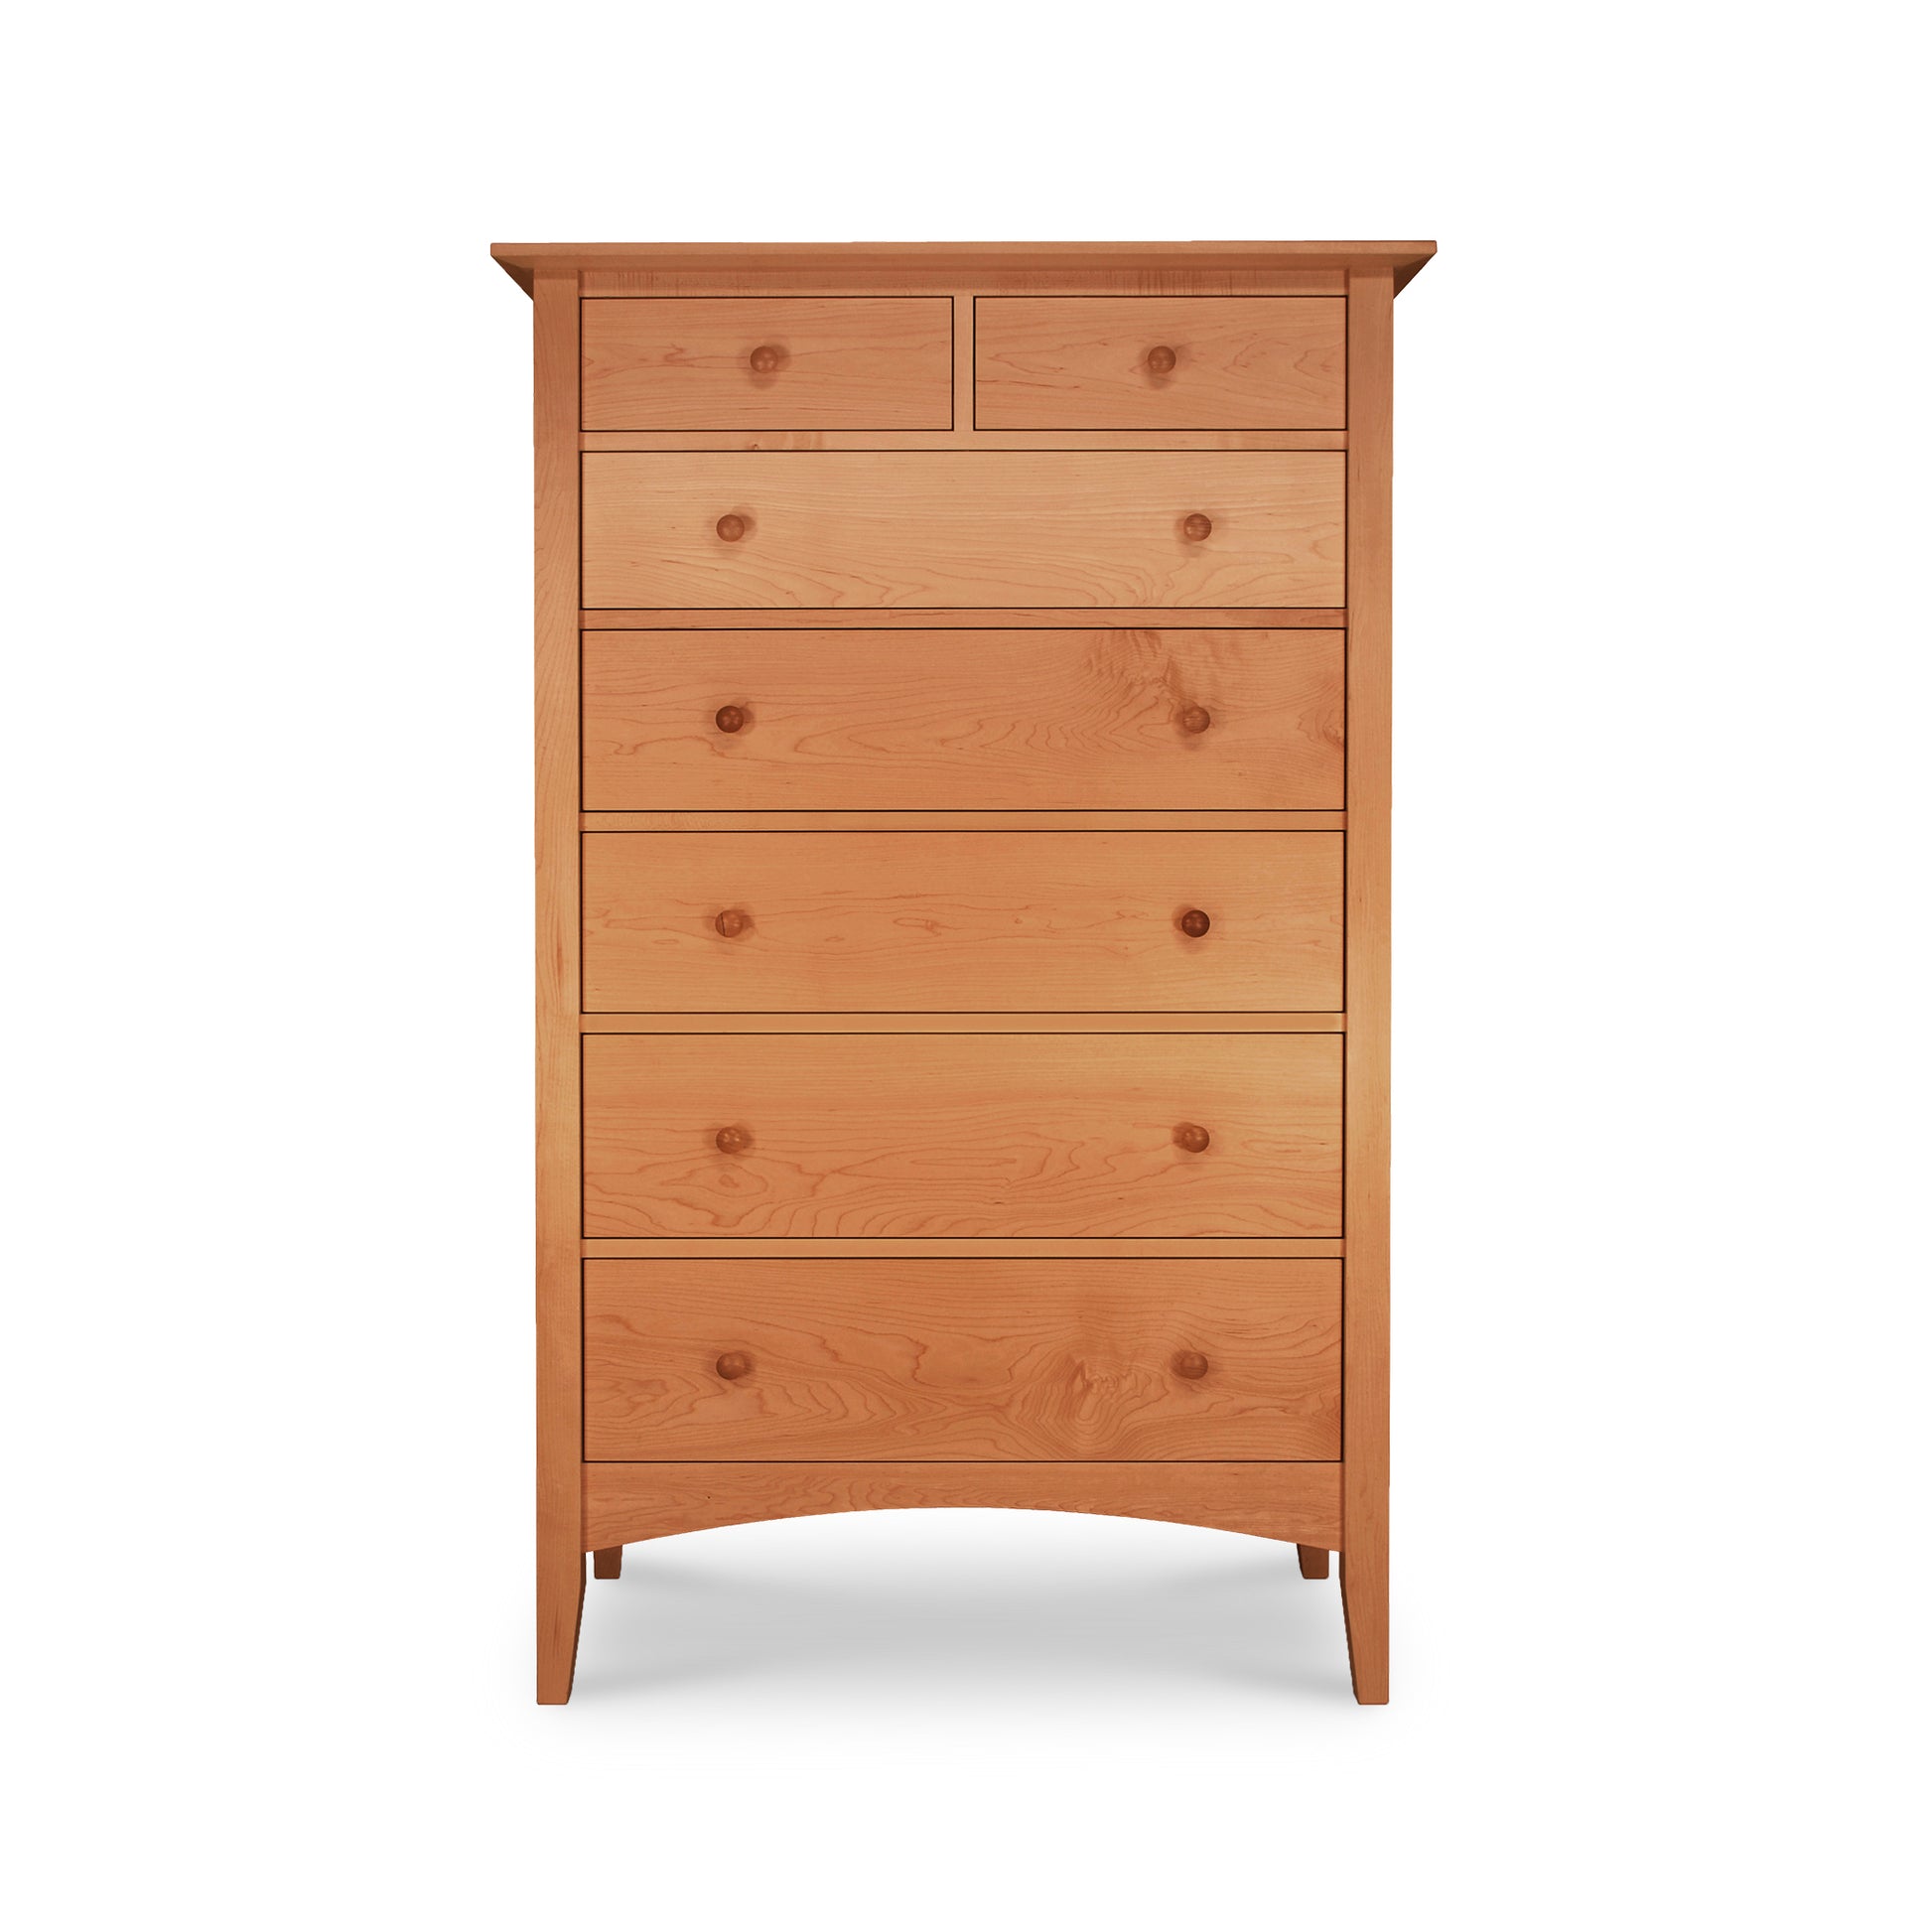 An eco-friendly wooden seven-drawer chest from the Maple Corner Woodworks American Shaker Furniture Collection, standing against a white background.